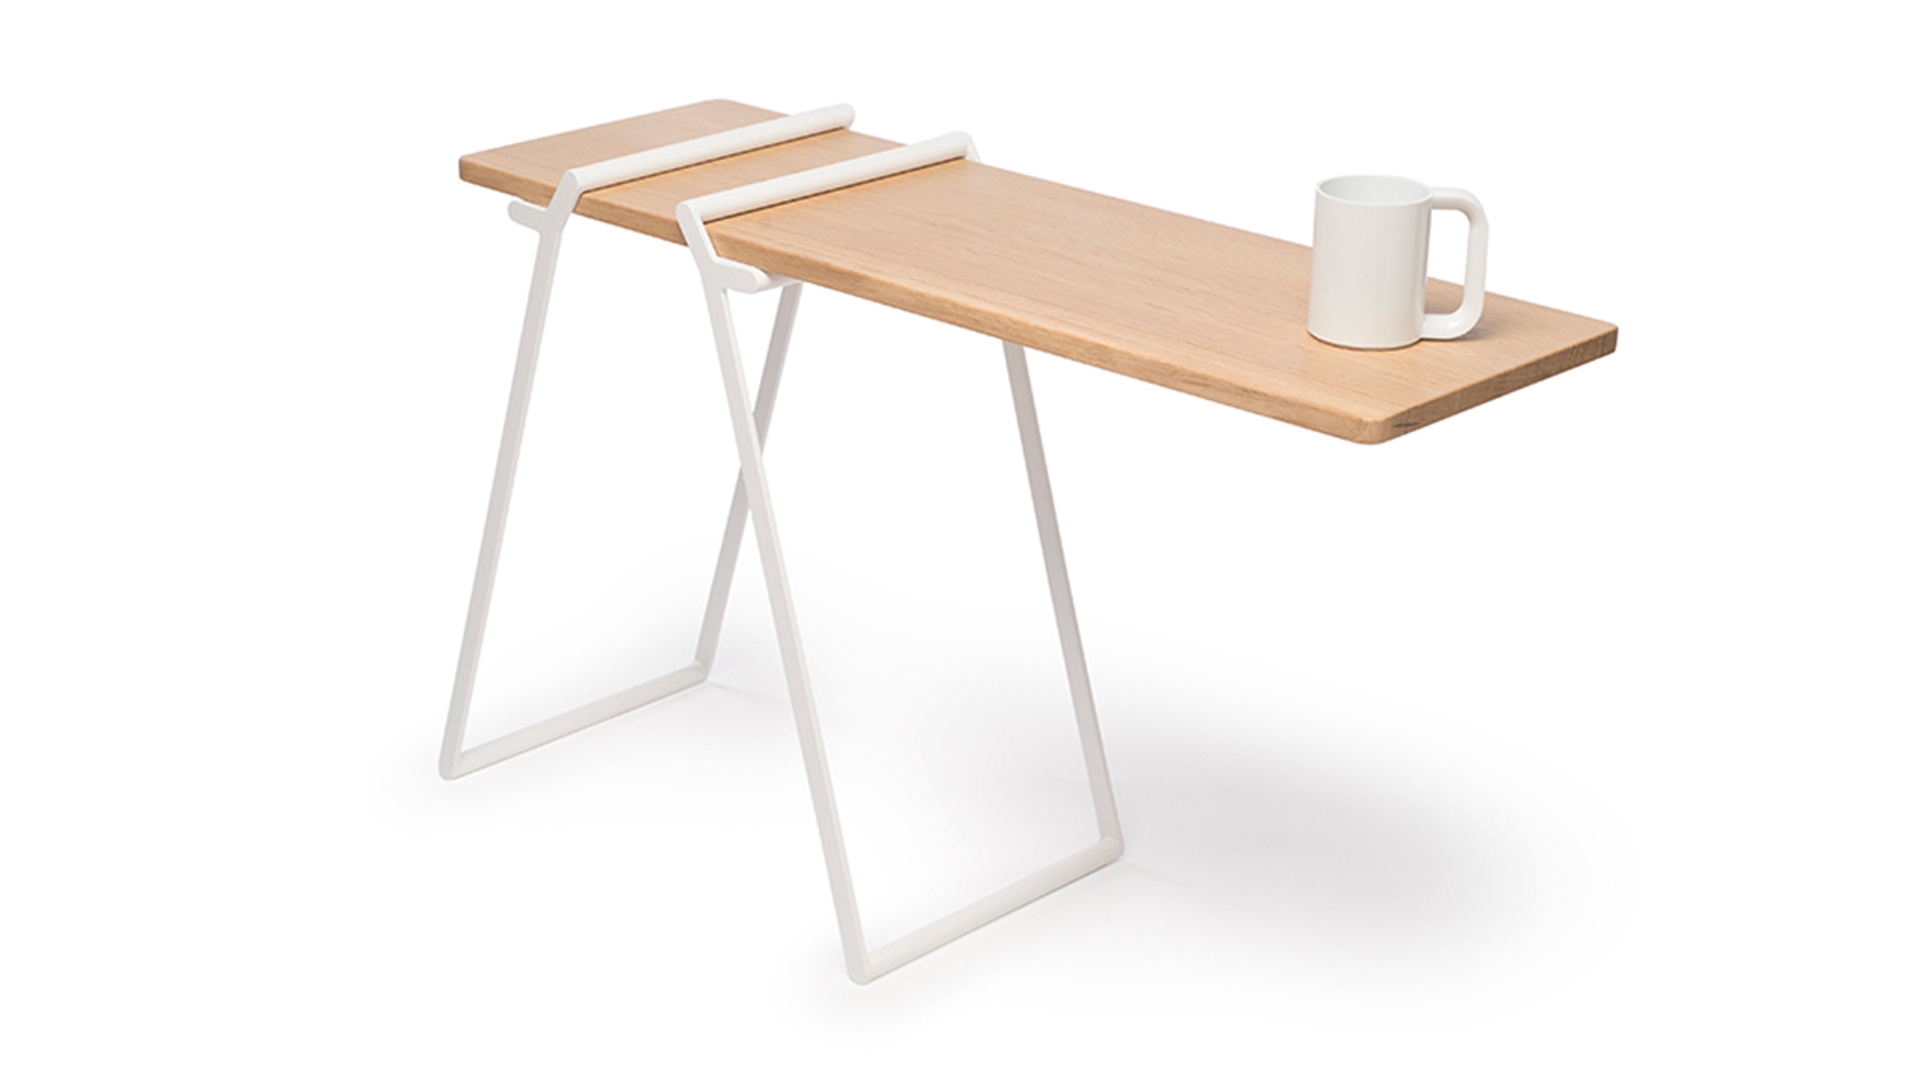 Flat wood table with 2 rectangular legs, one adjusted closer to other to create extended shelf